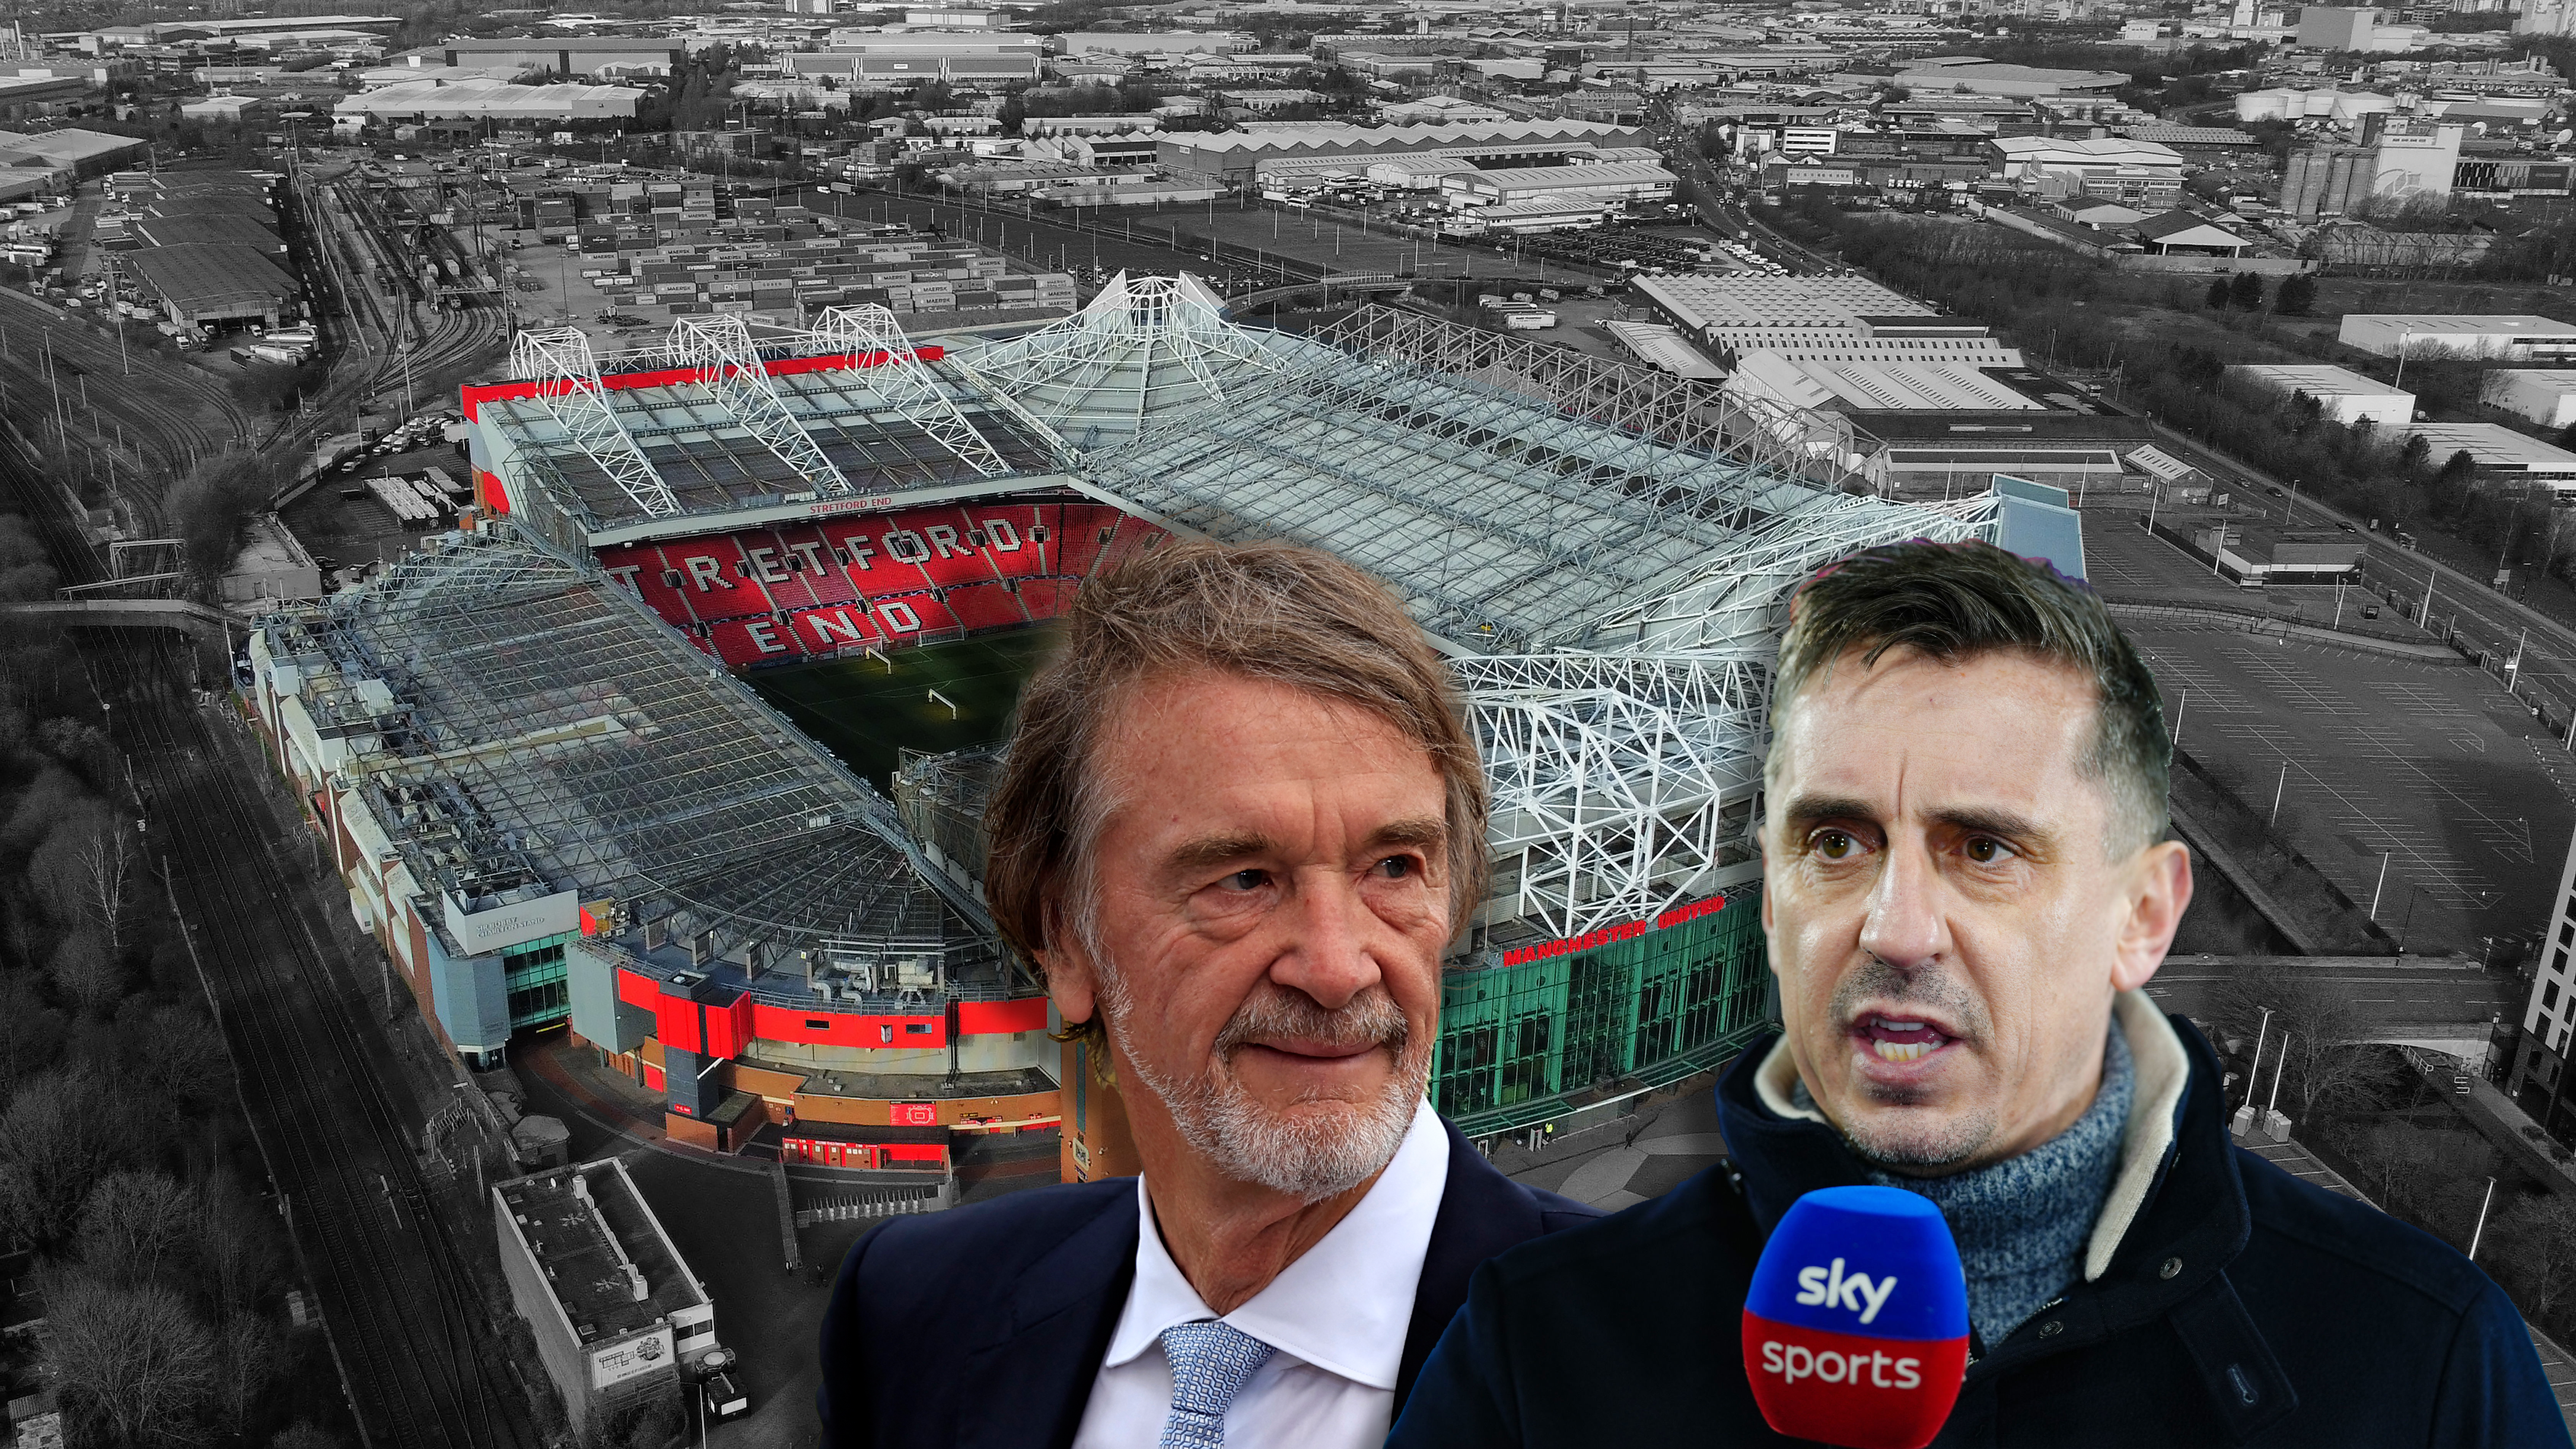 Sir Jim Ratcliffe has approached Gary Neville to assist with revamping Old Trafford